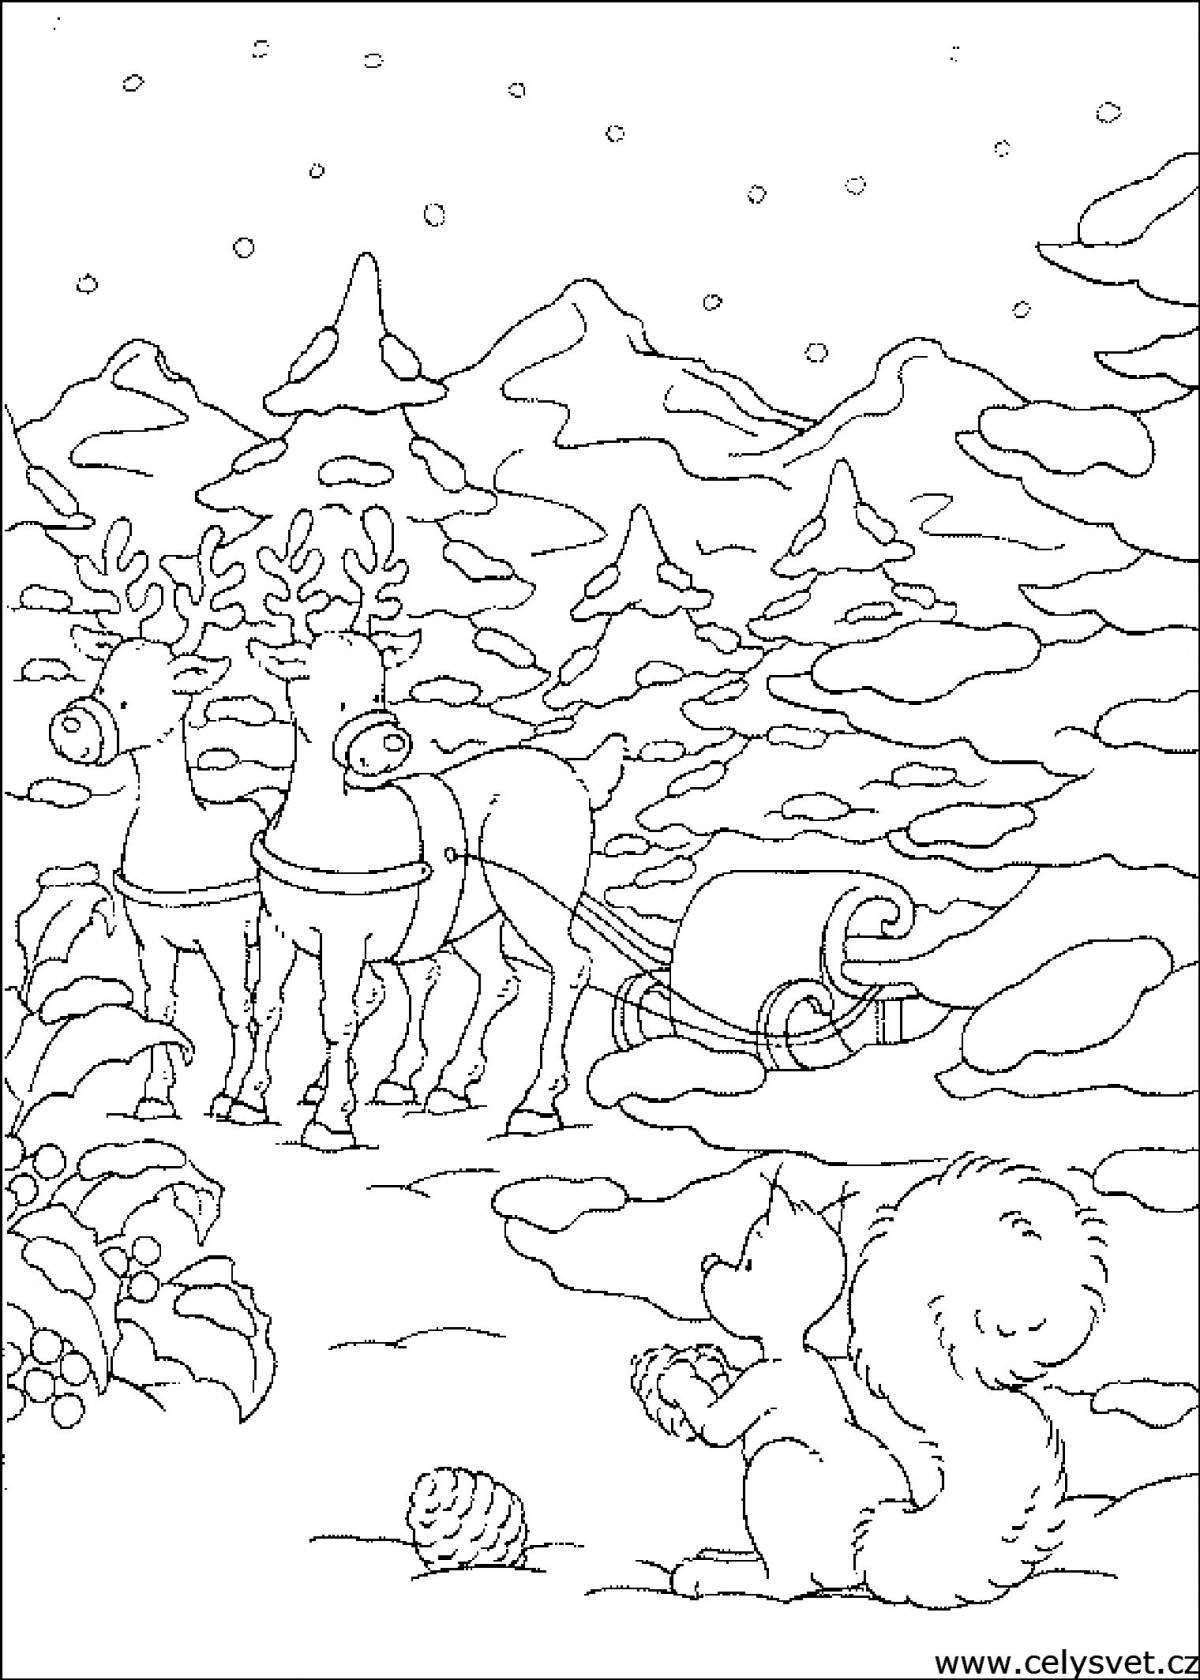 Coloring book dreamy winter forest for kids